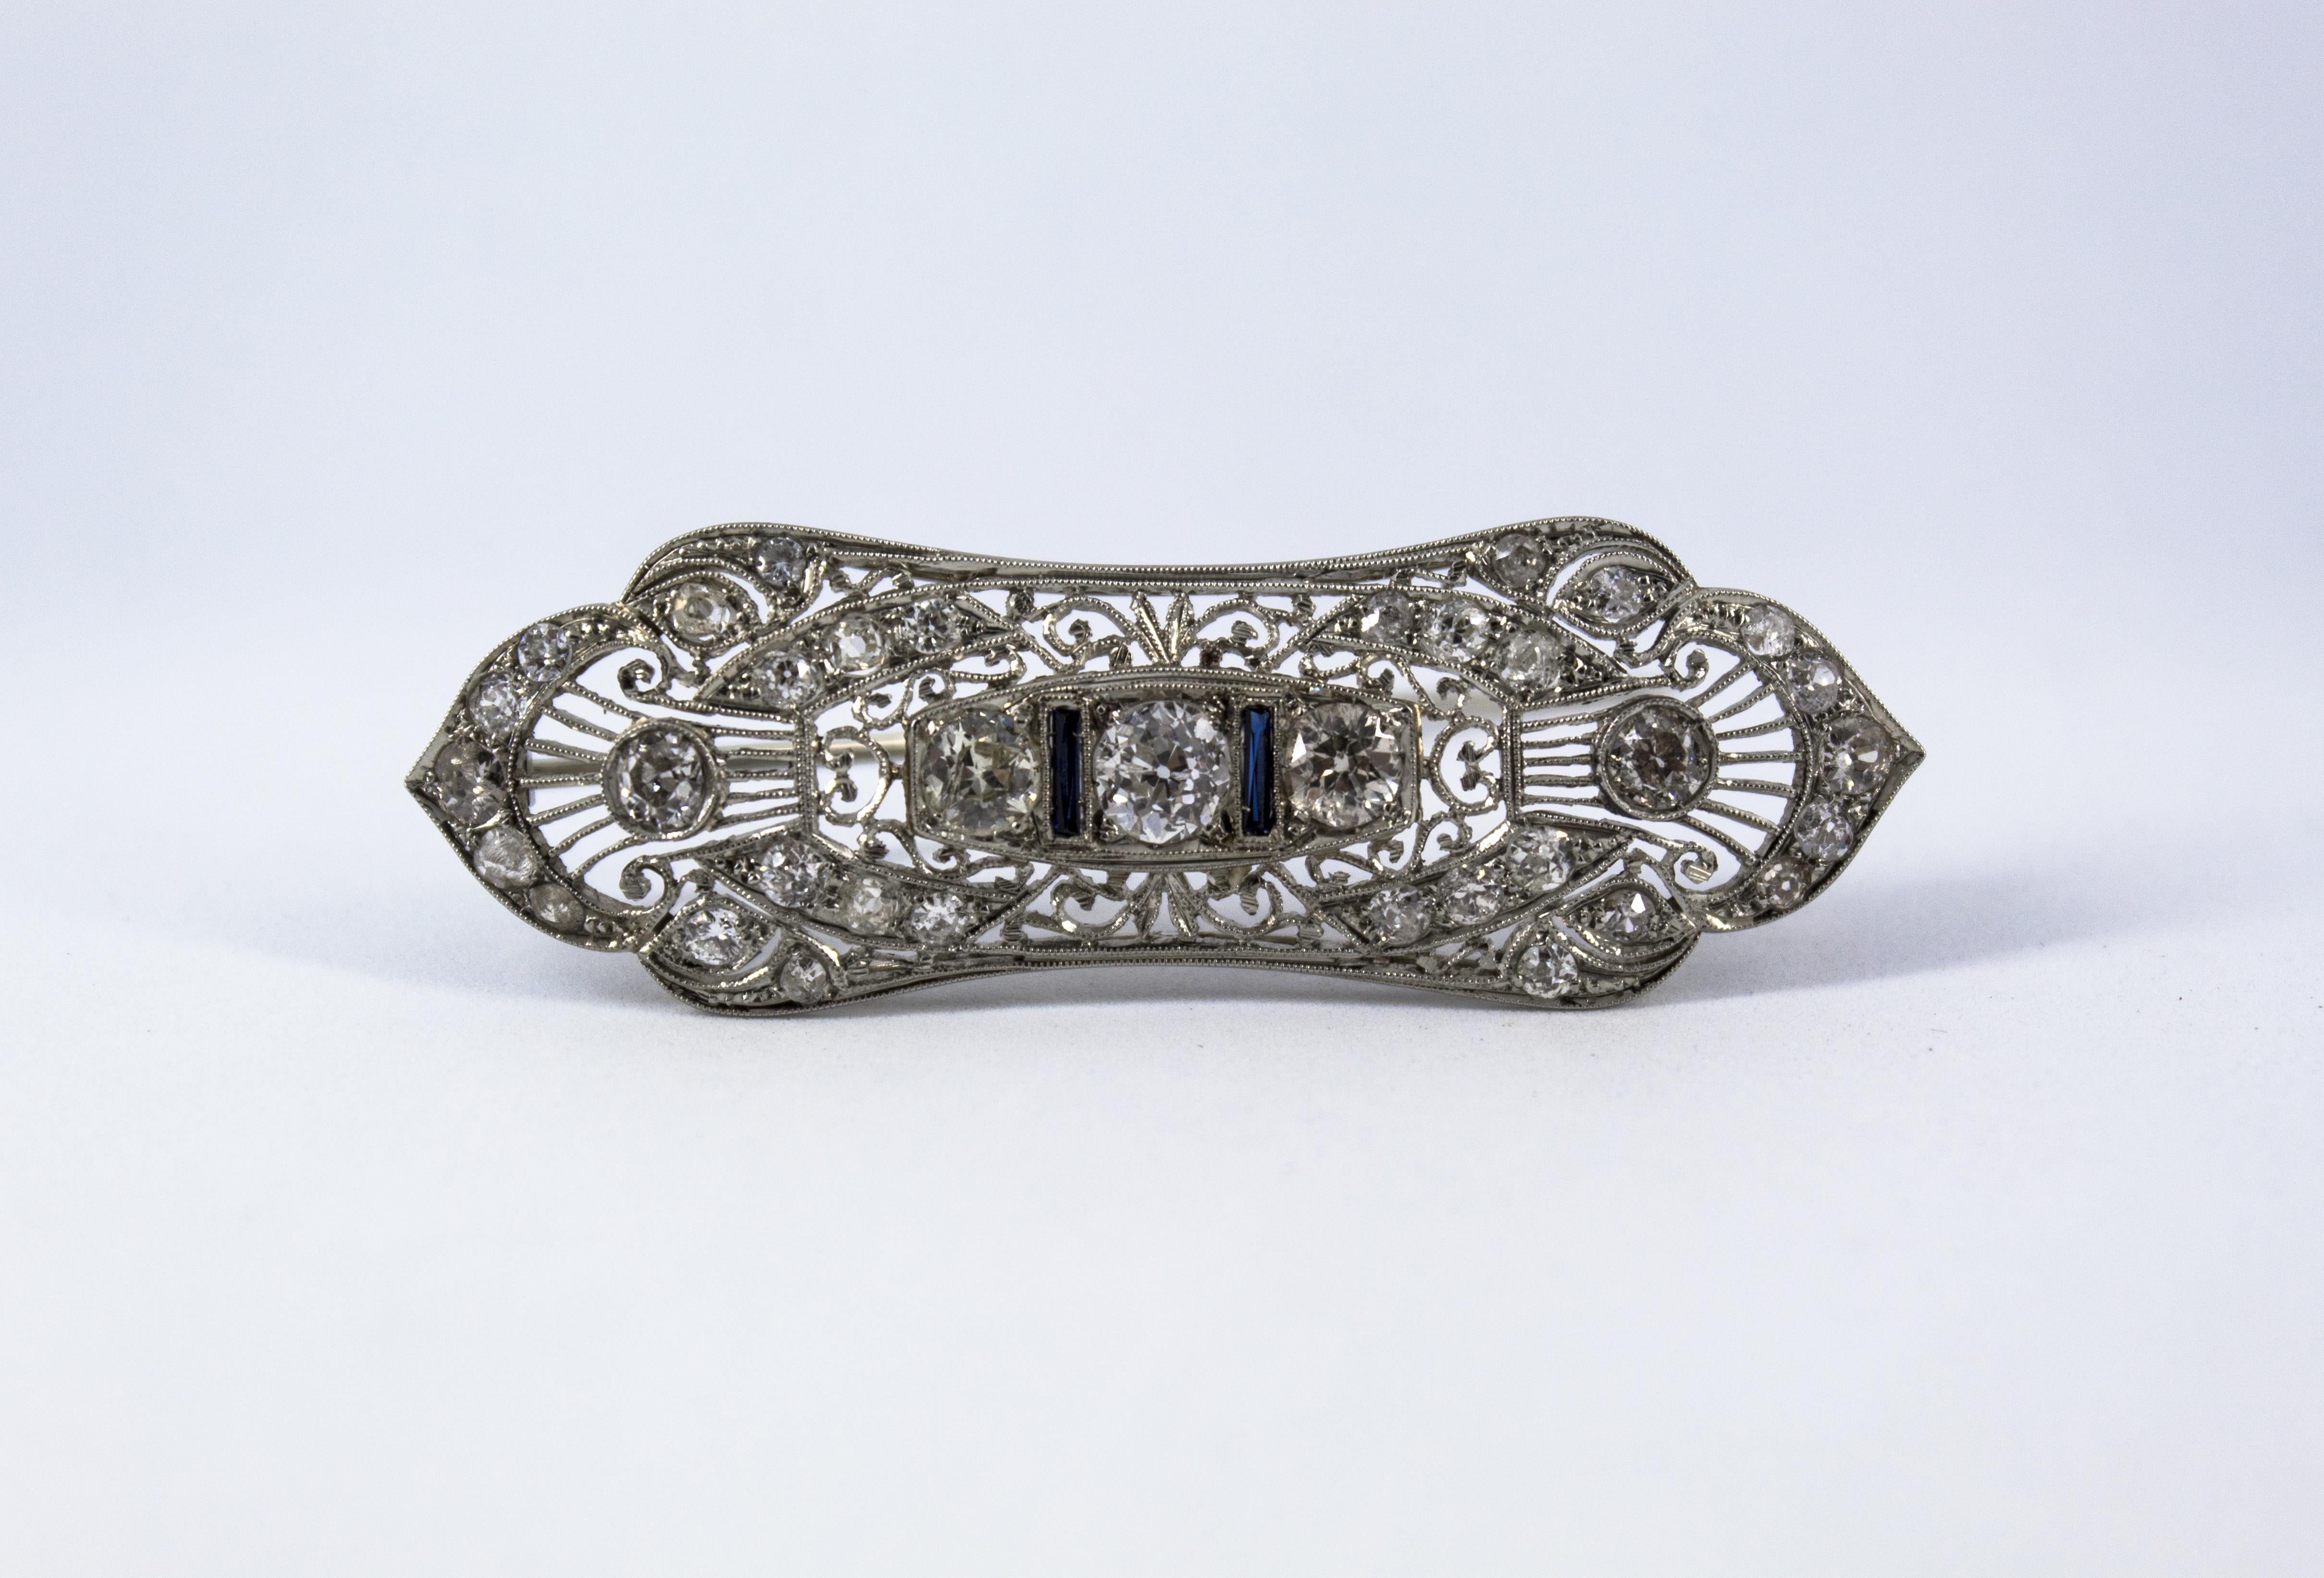 This Brooch is made of 18K White Gold.
This Brooch has 4.20 Carats of White Diamonds.
This Brooch has 0.20 Carats of Blue Sapphires.
This Brooch is inspired by Renaissance Style.
We're a workshop so every piece is handmade, customizable and